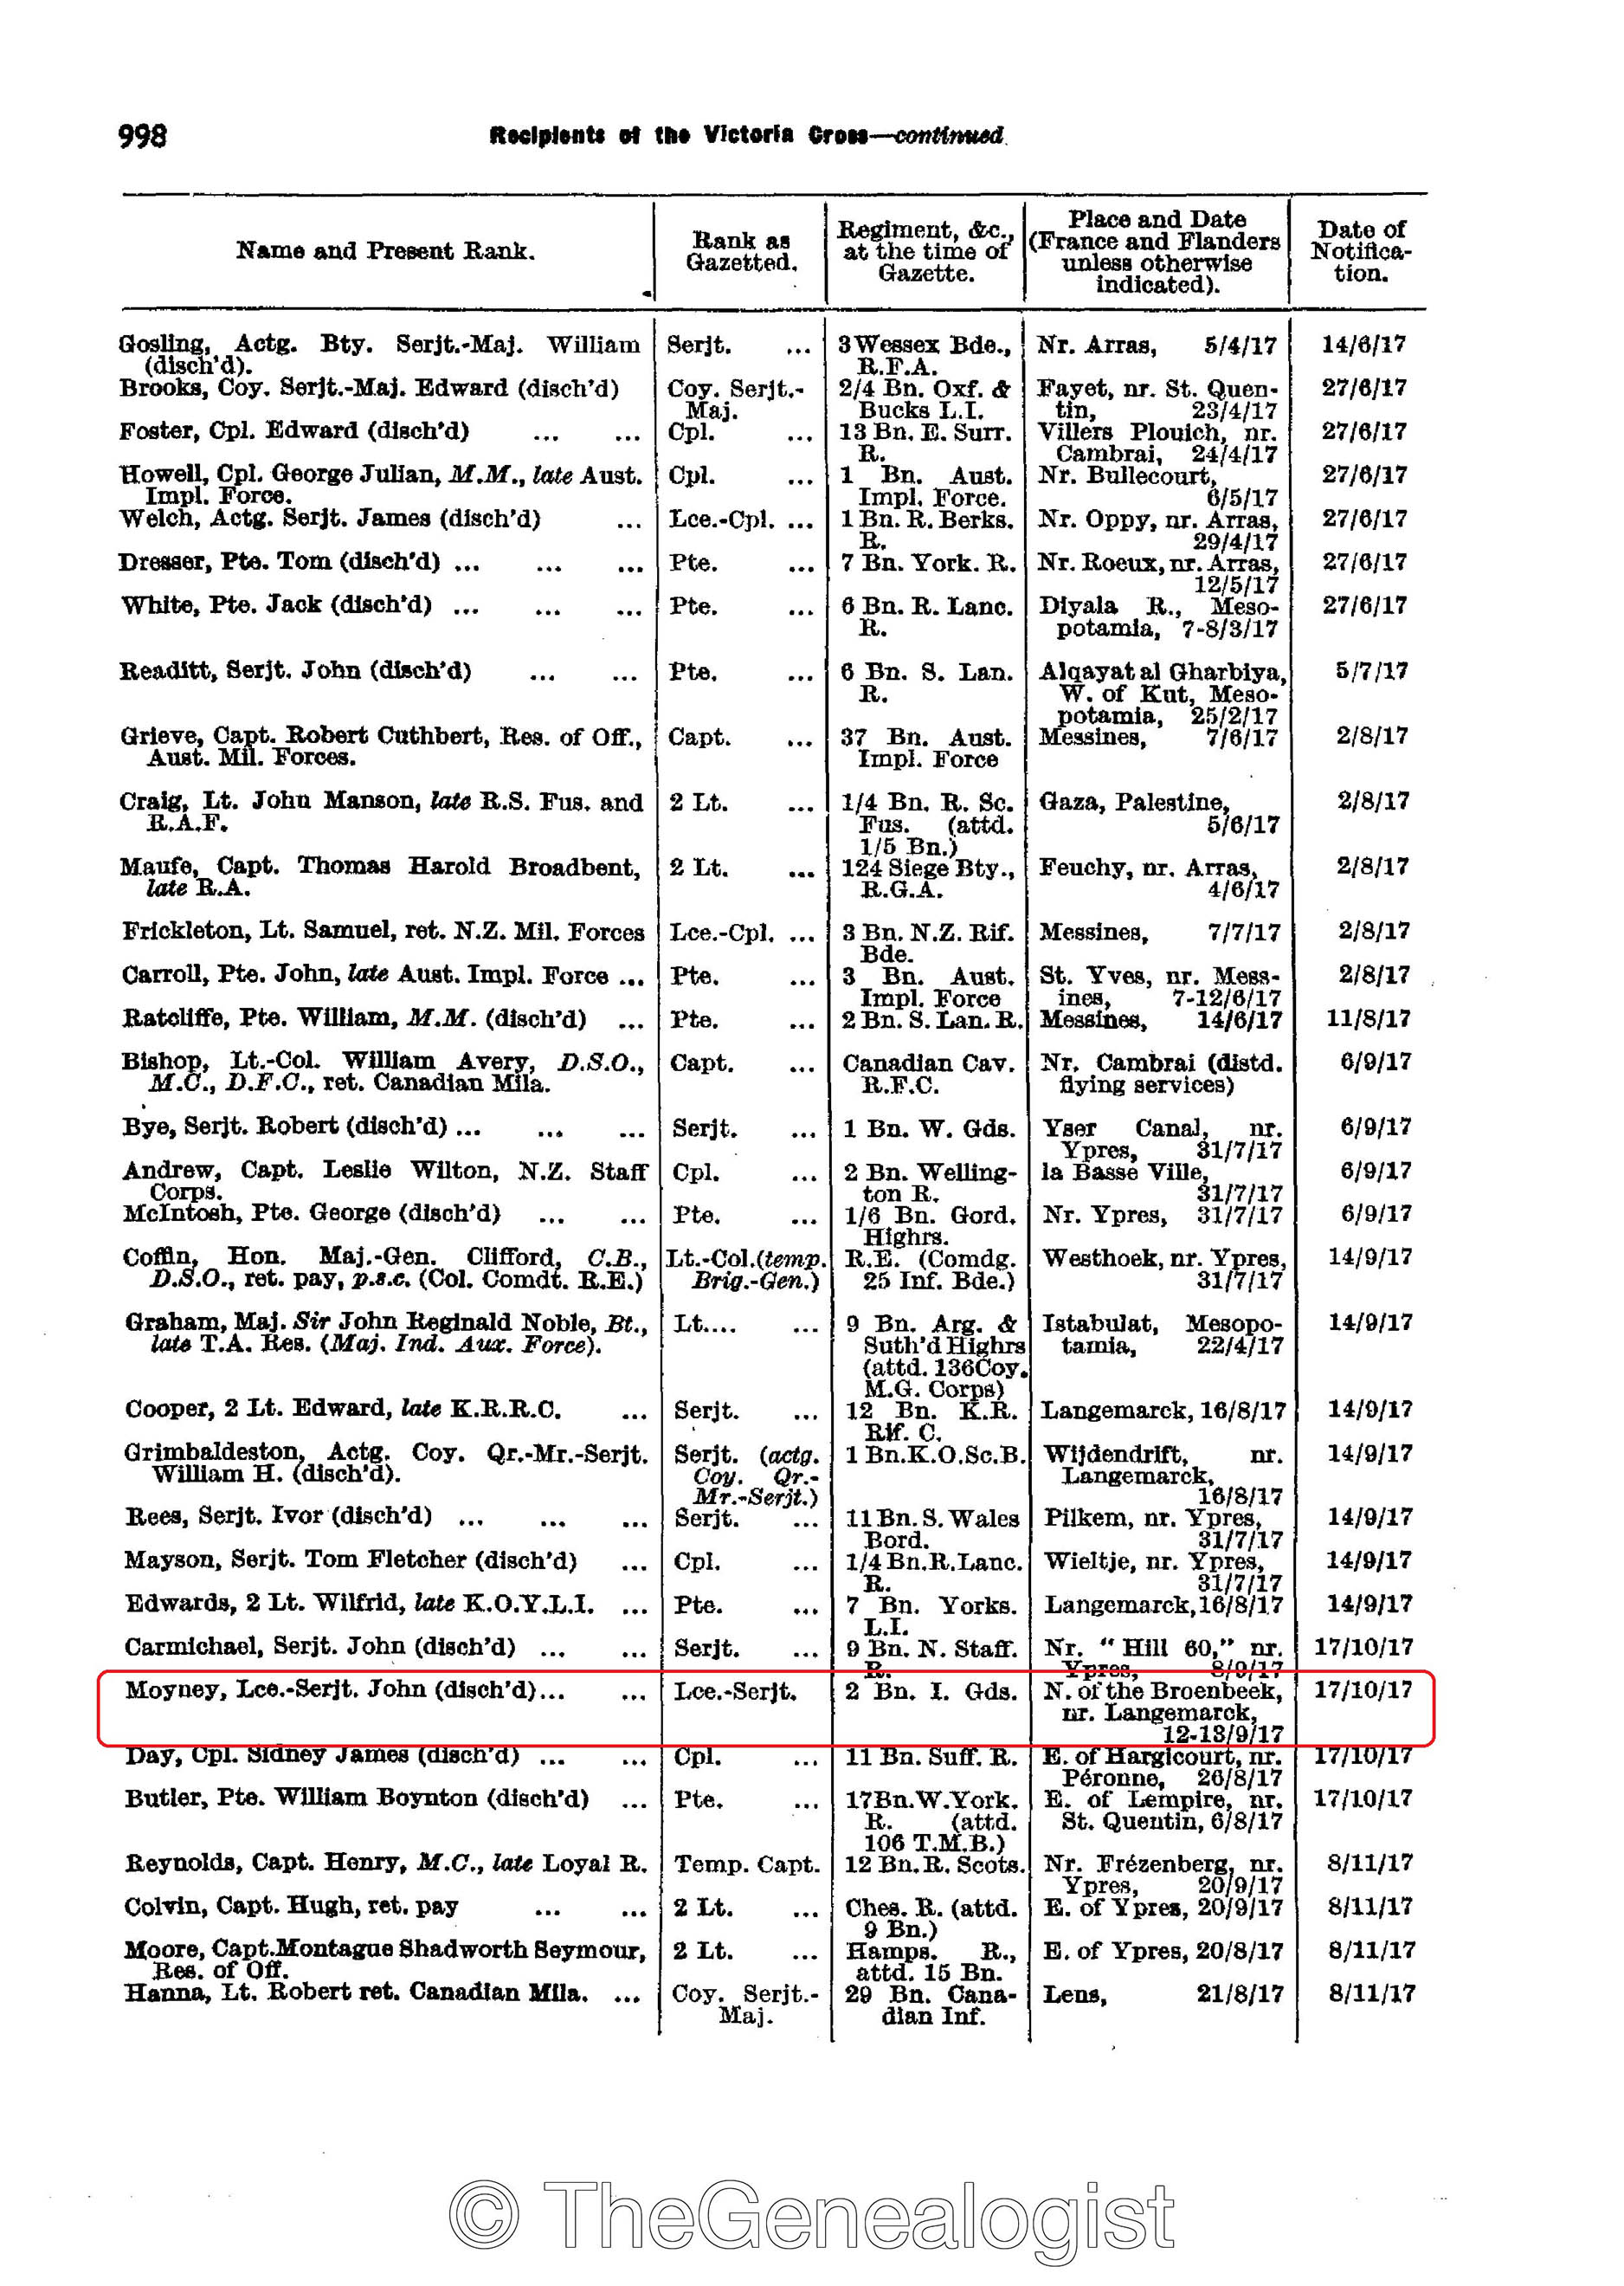 The Army List 1938 on TheGenealogist